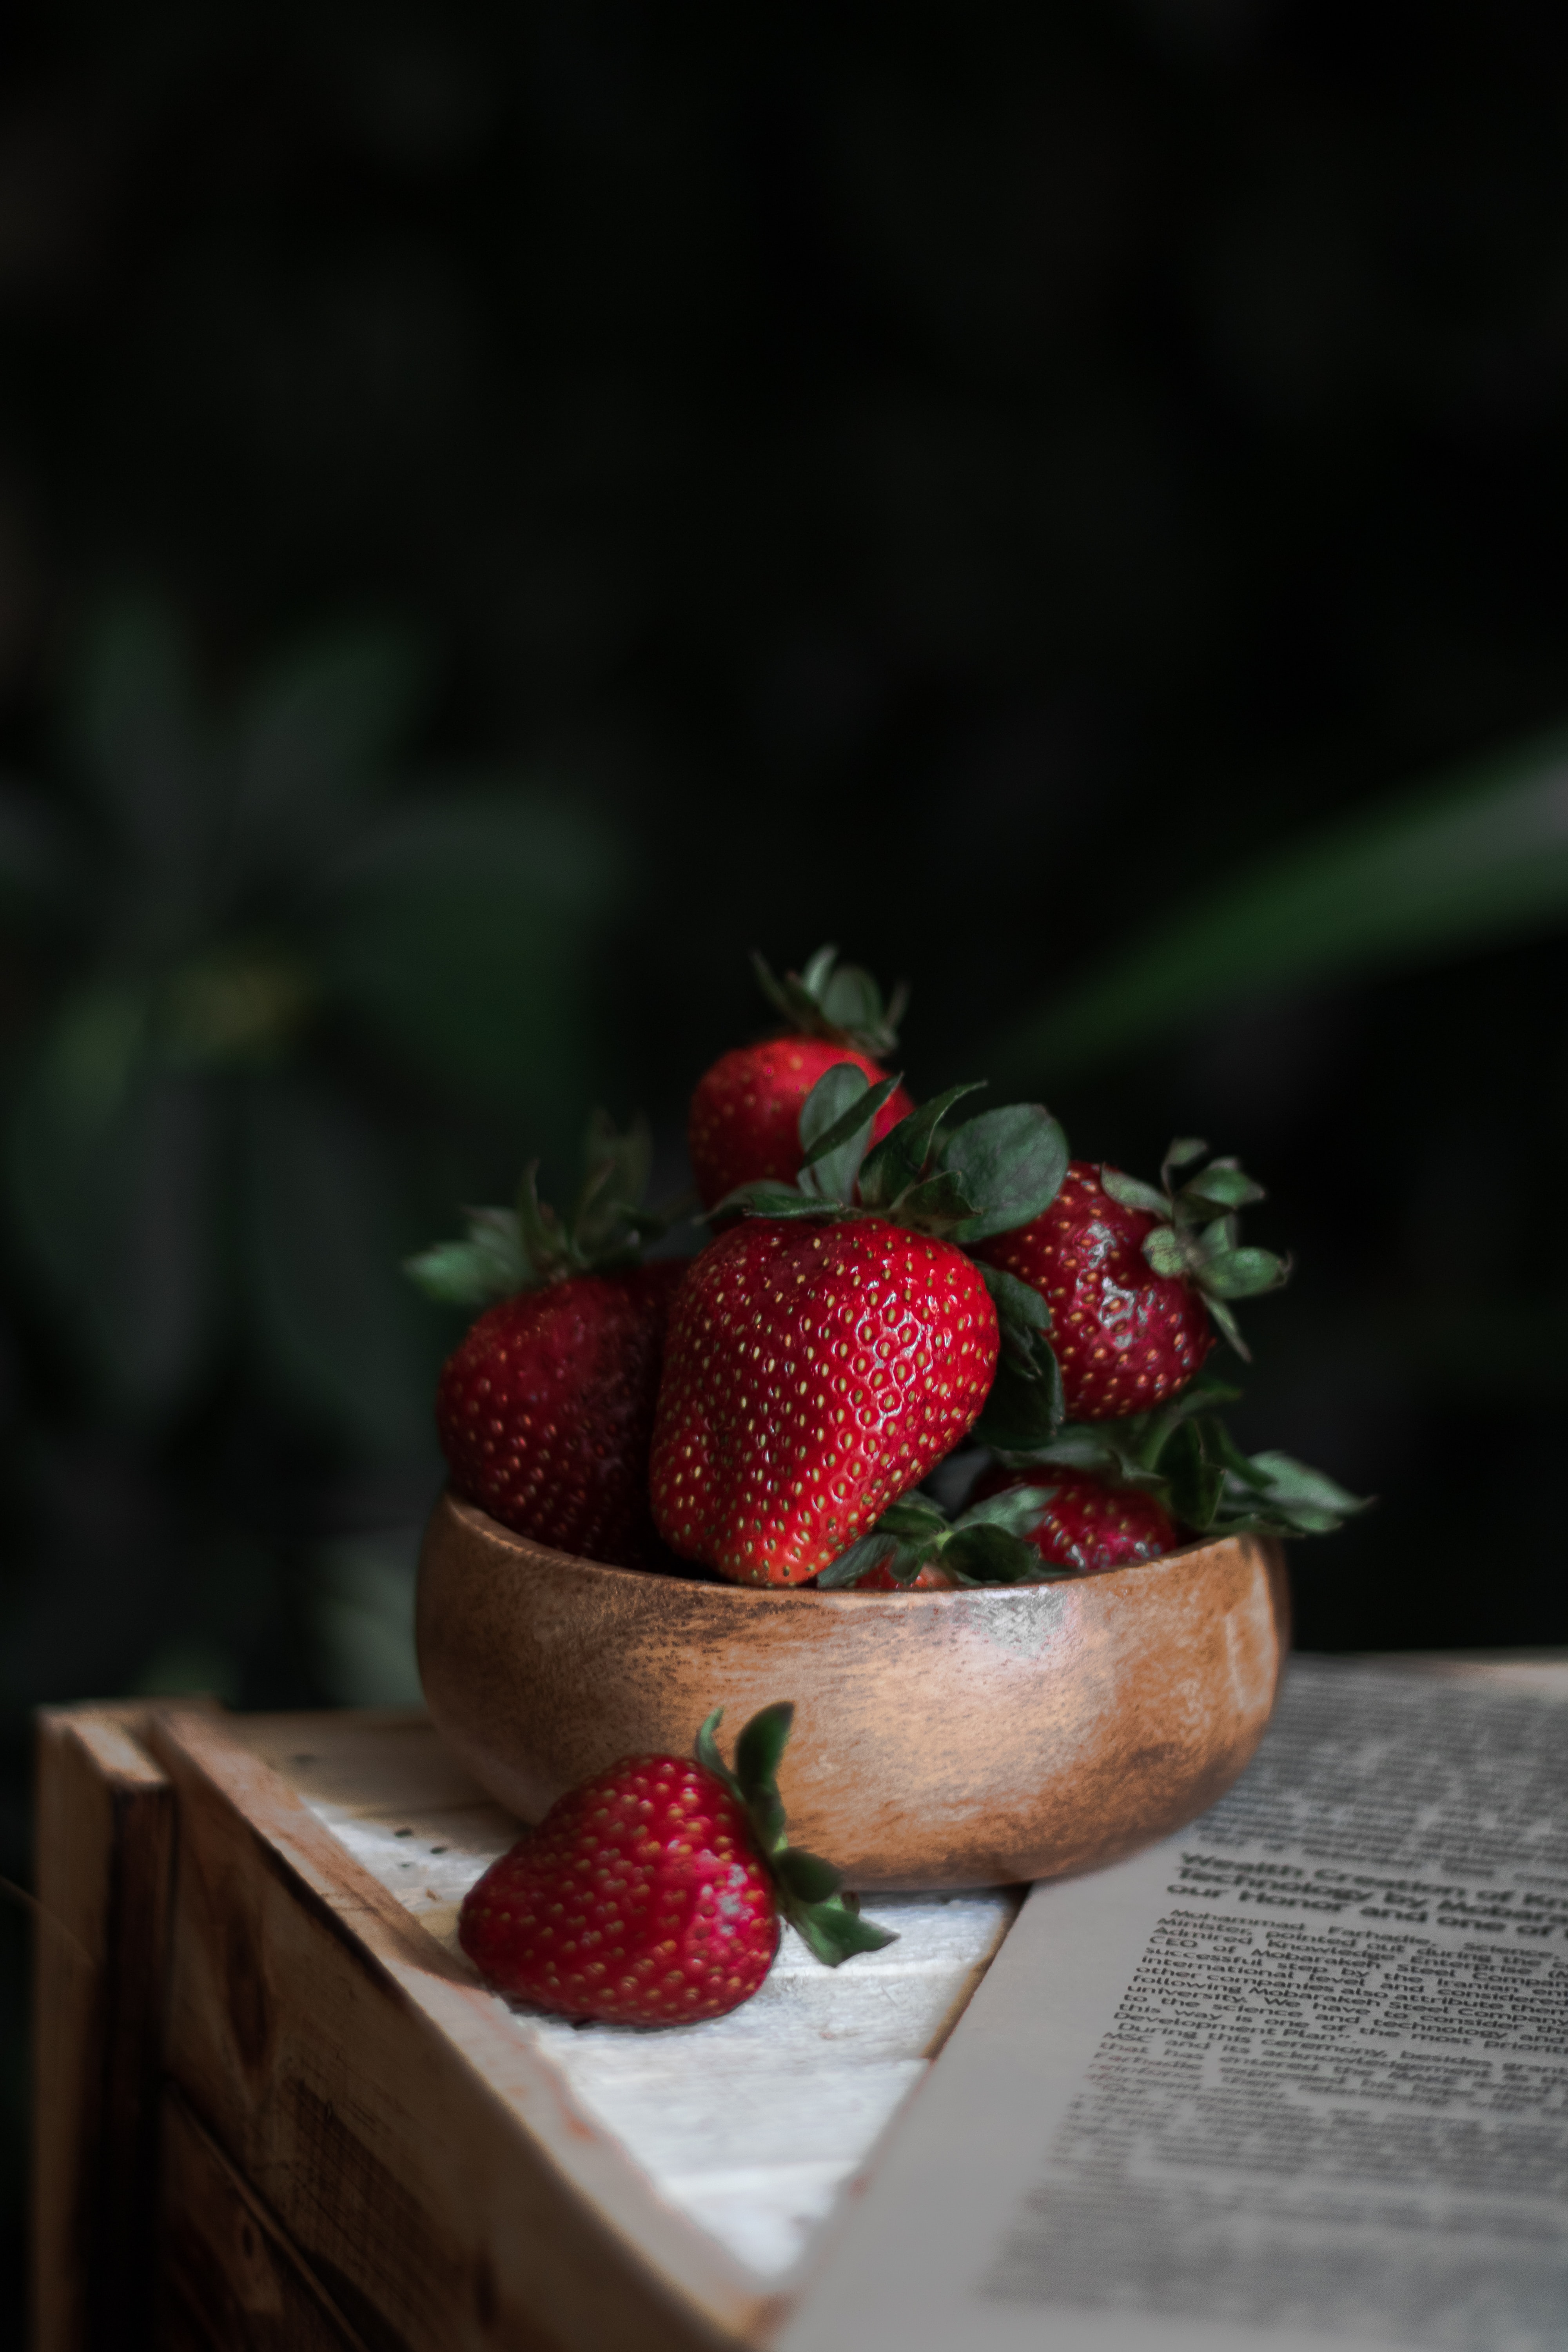 strawberry, berry, food, plate, fruit, newspaper